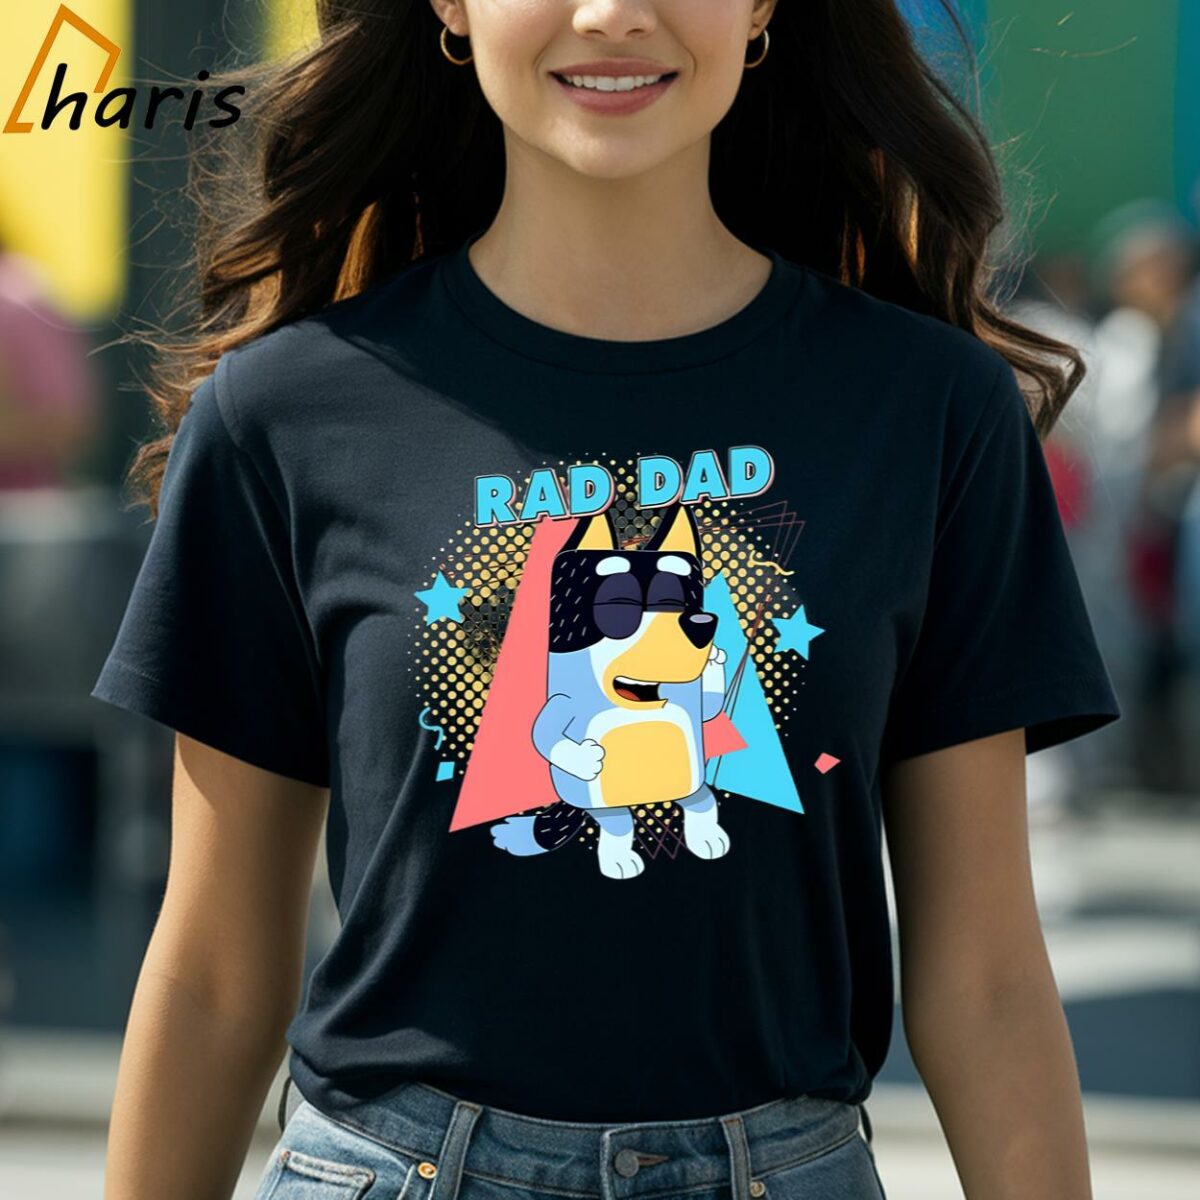 Rad Dad Bluey Shirt Family Bandit Heeler For Dad Fathers Day Gift 2 Shirt